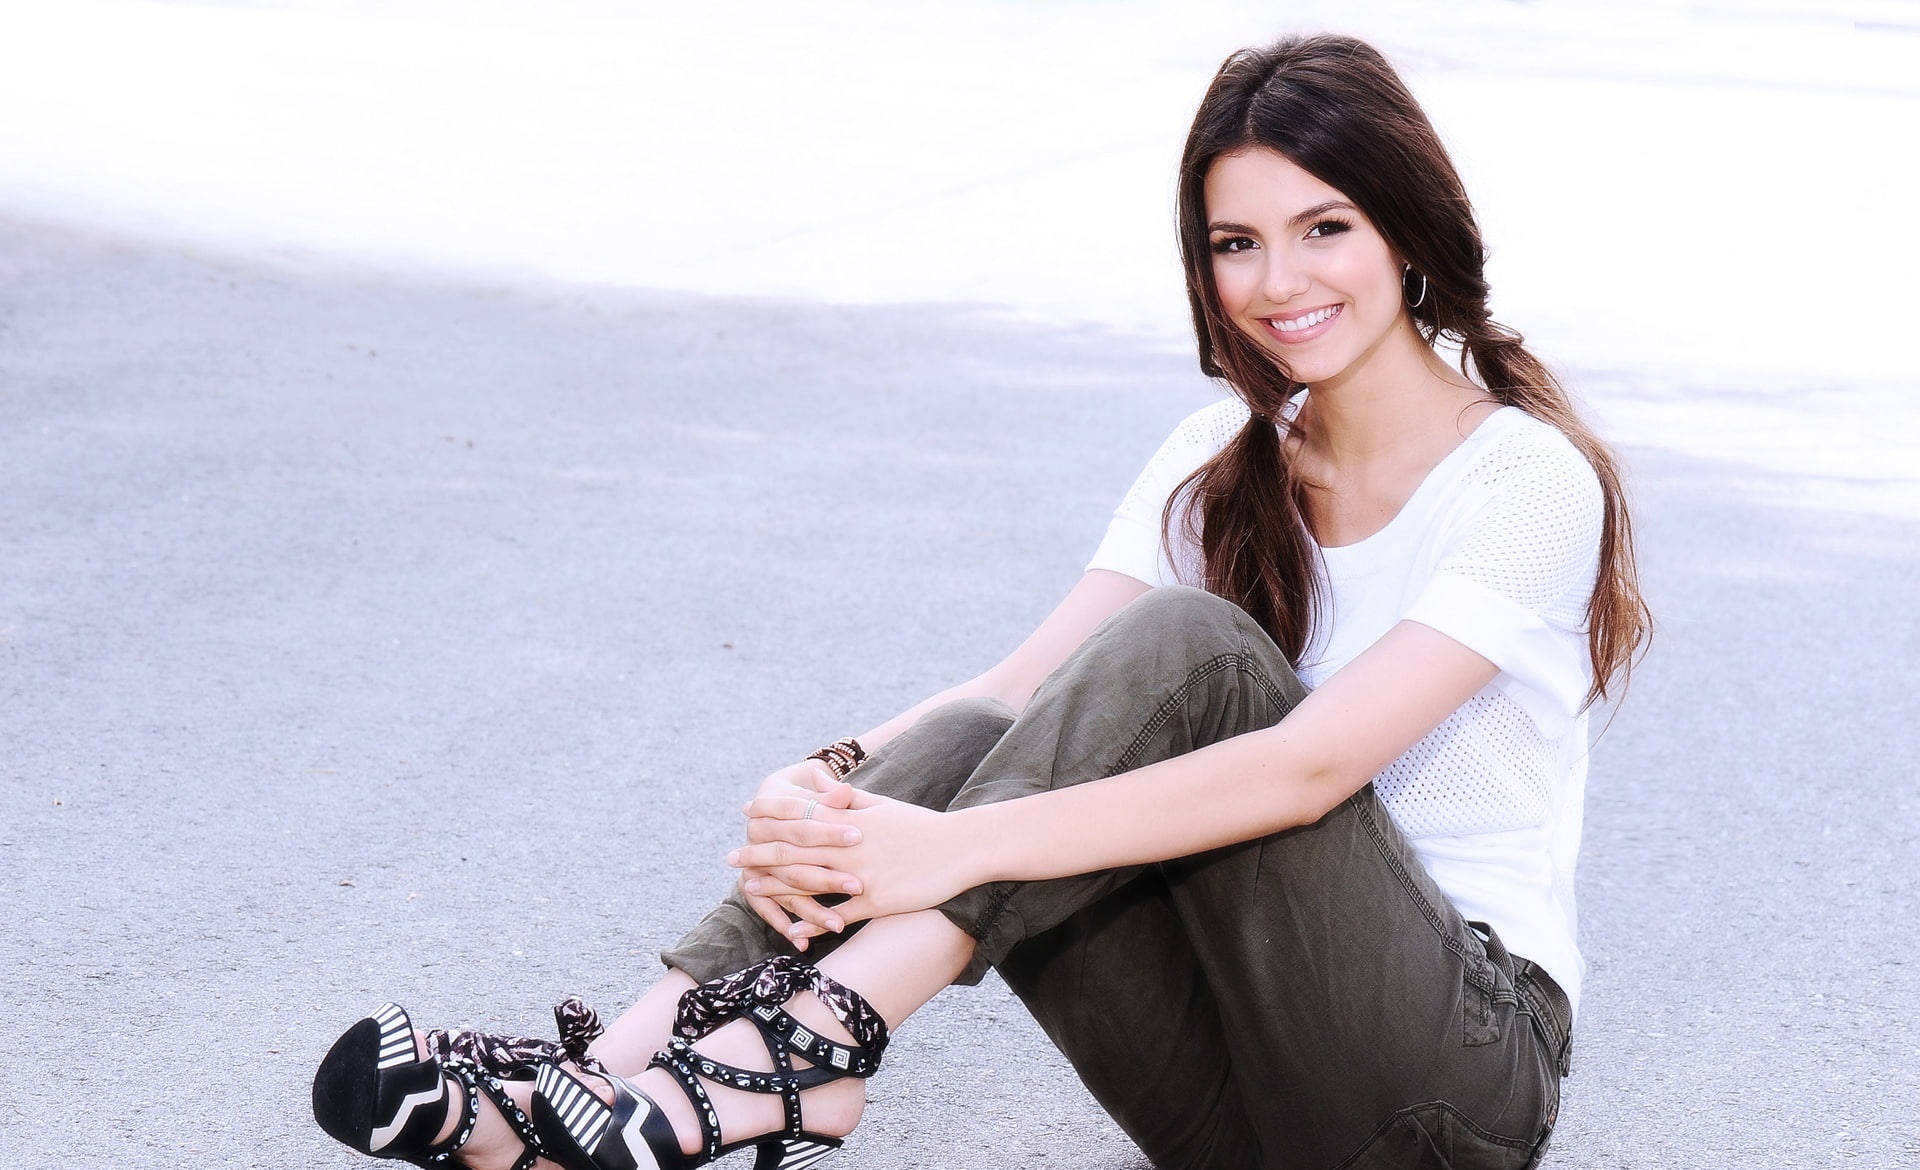 Victoria Justice Bright Smile, women's white scoop neck shirt and gray pants